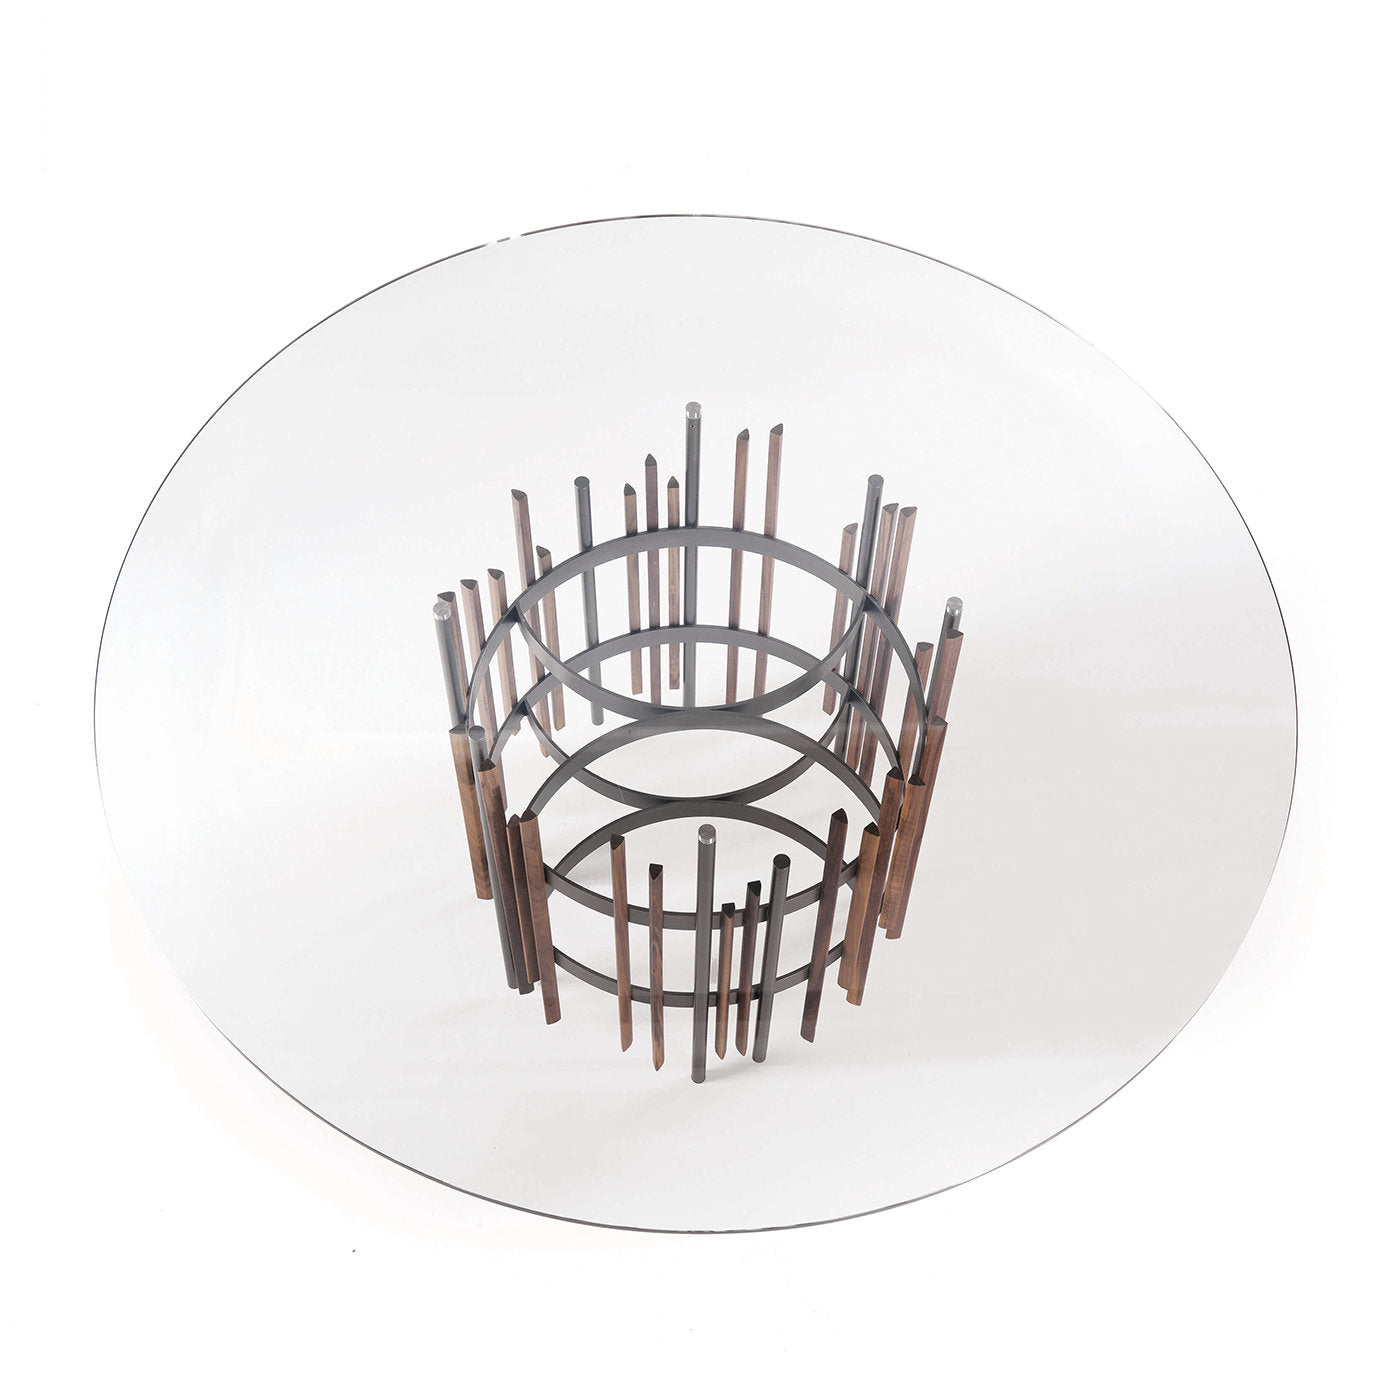 Tube Round Dining Table by Norberto Delfinetti - Alternative view 1